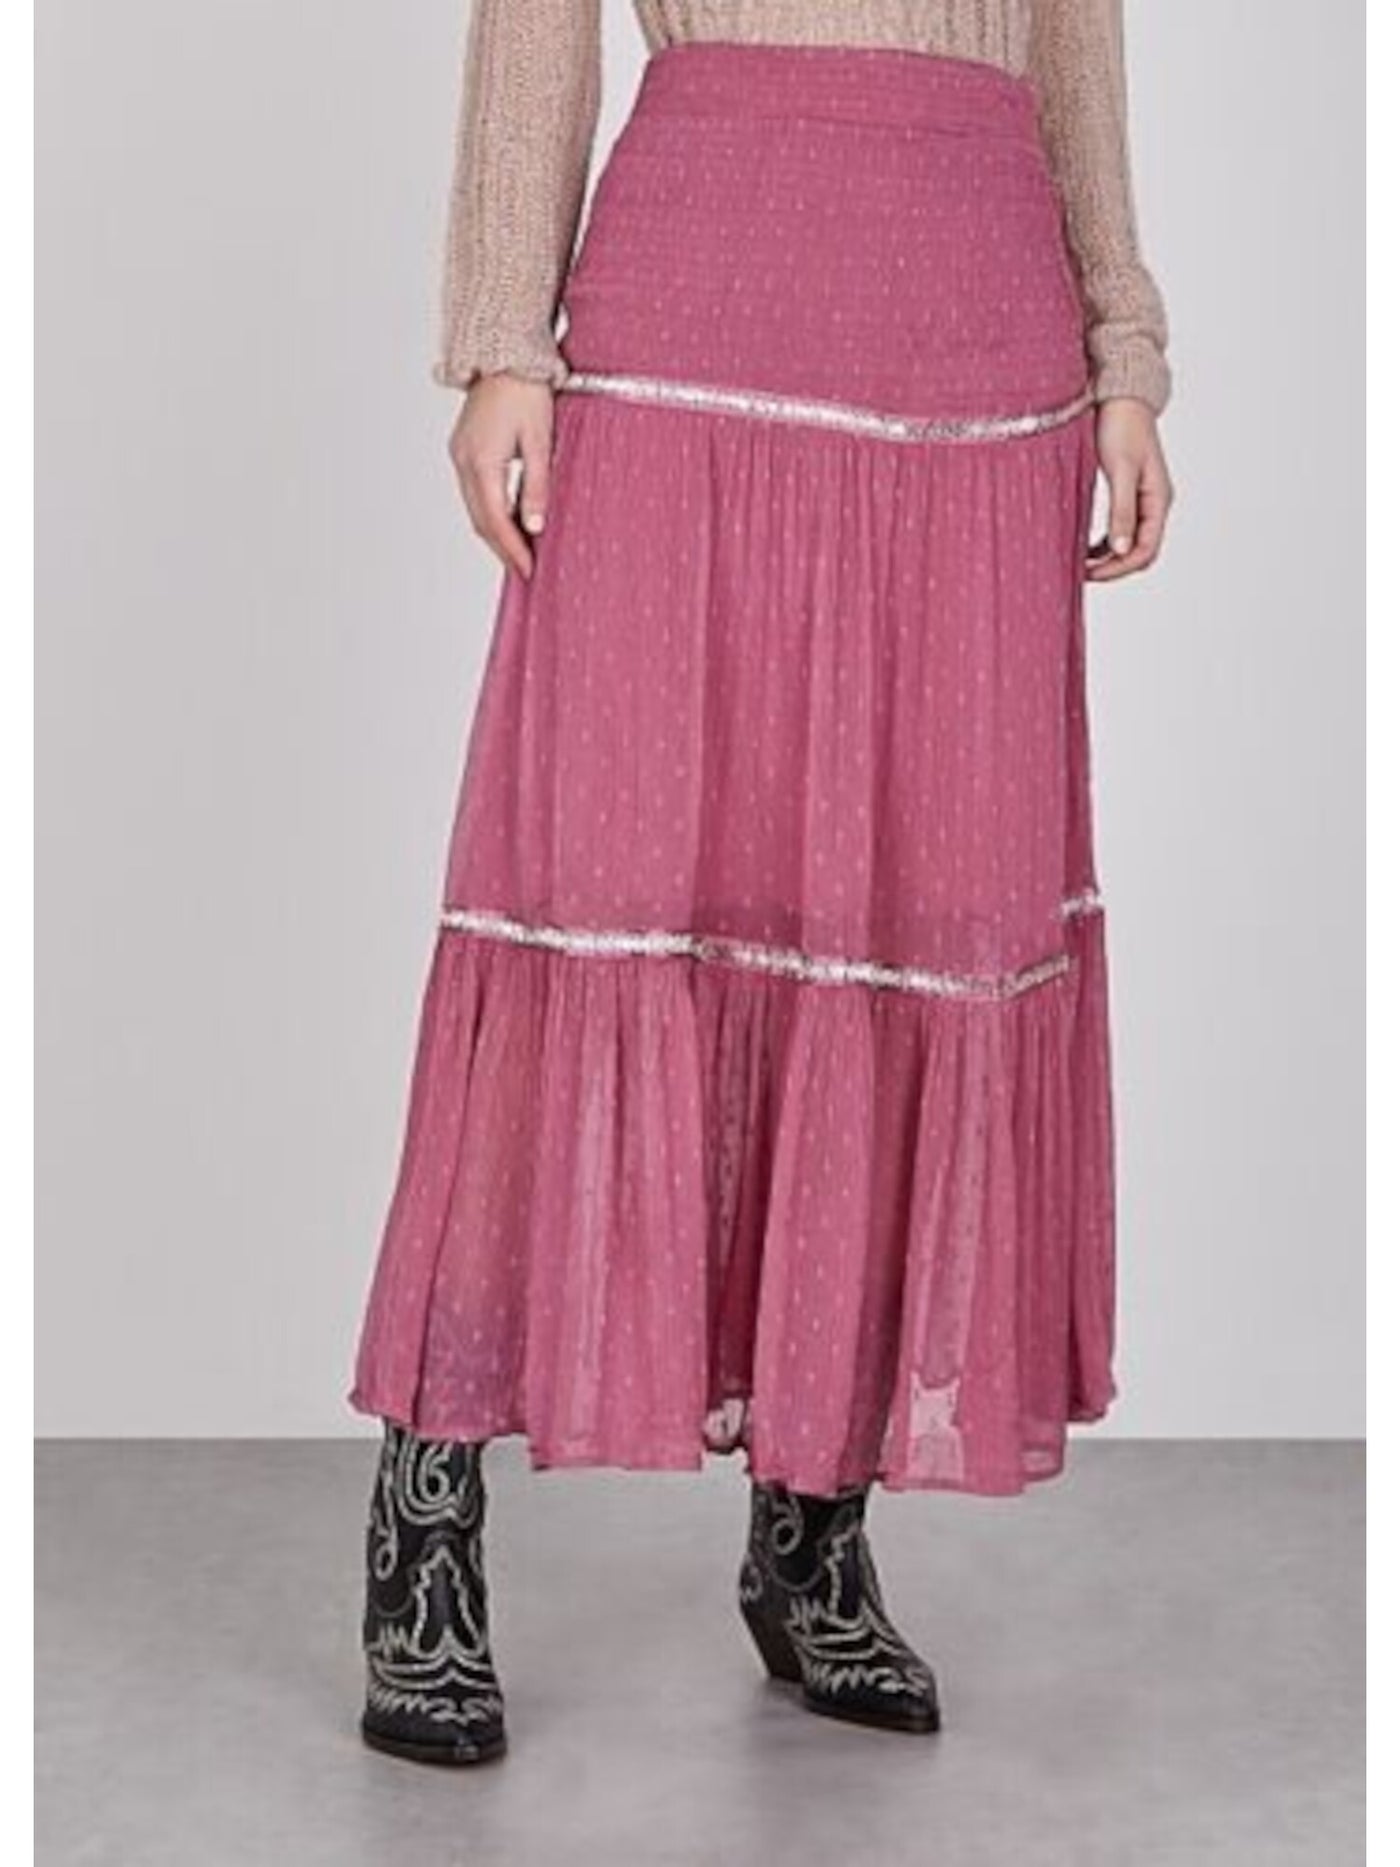 FREE PEOPLE Womens Pink Zippered Embellished Textured Pleated Tea-Length Party Peasant Skirt 10